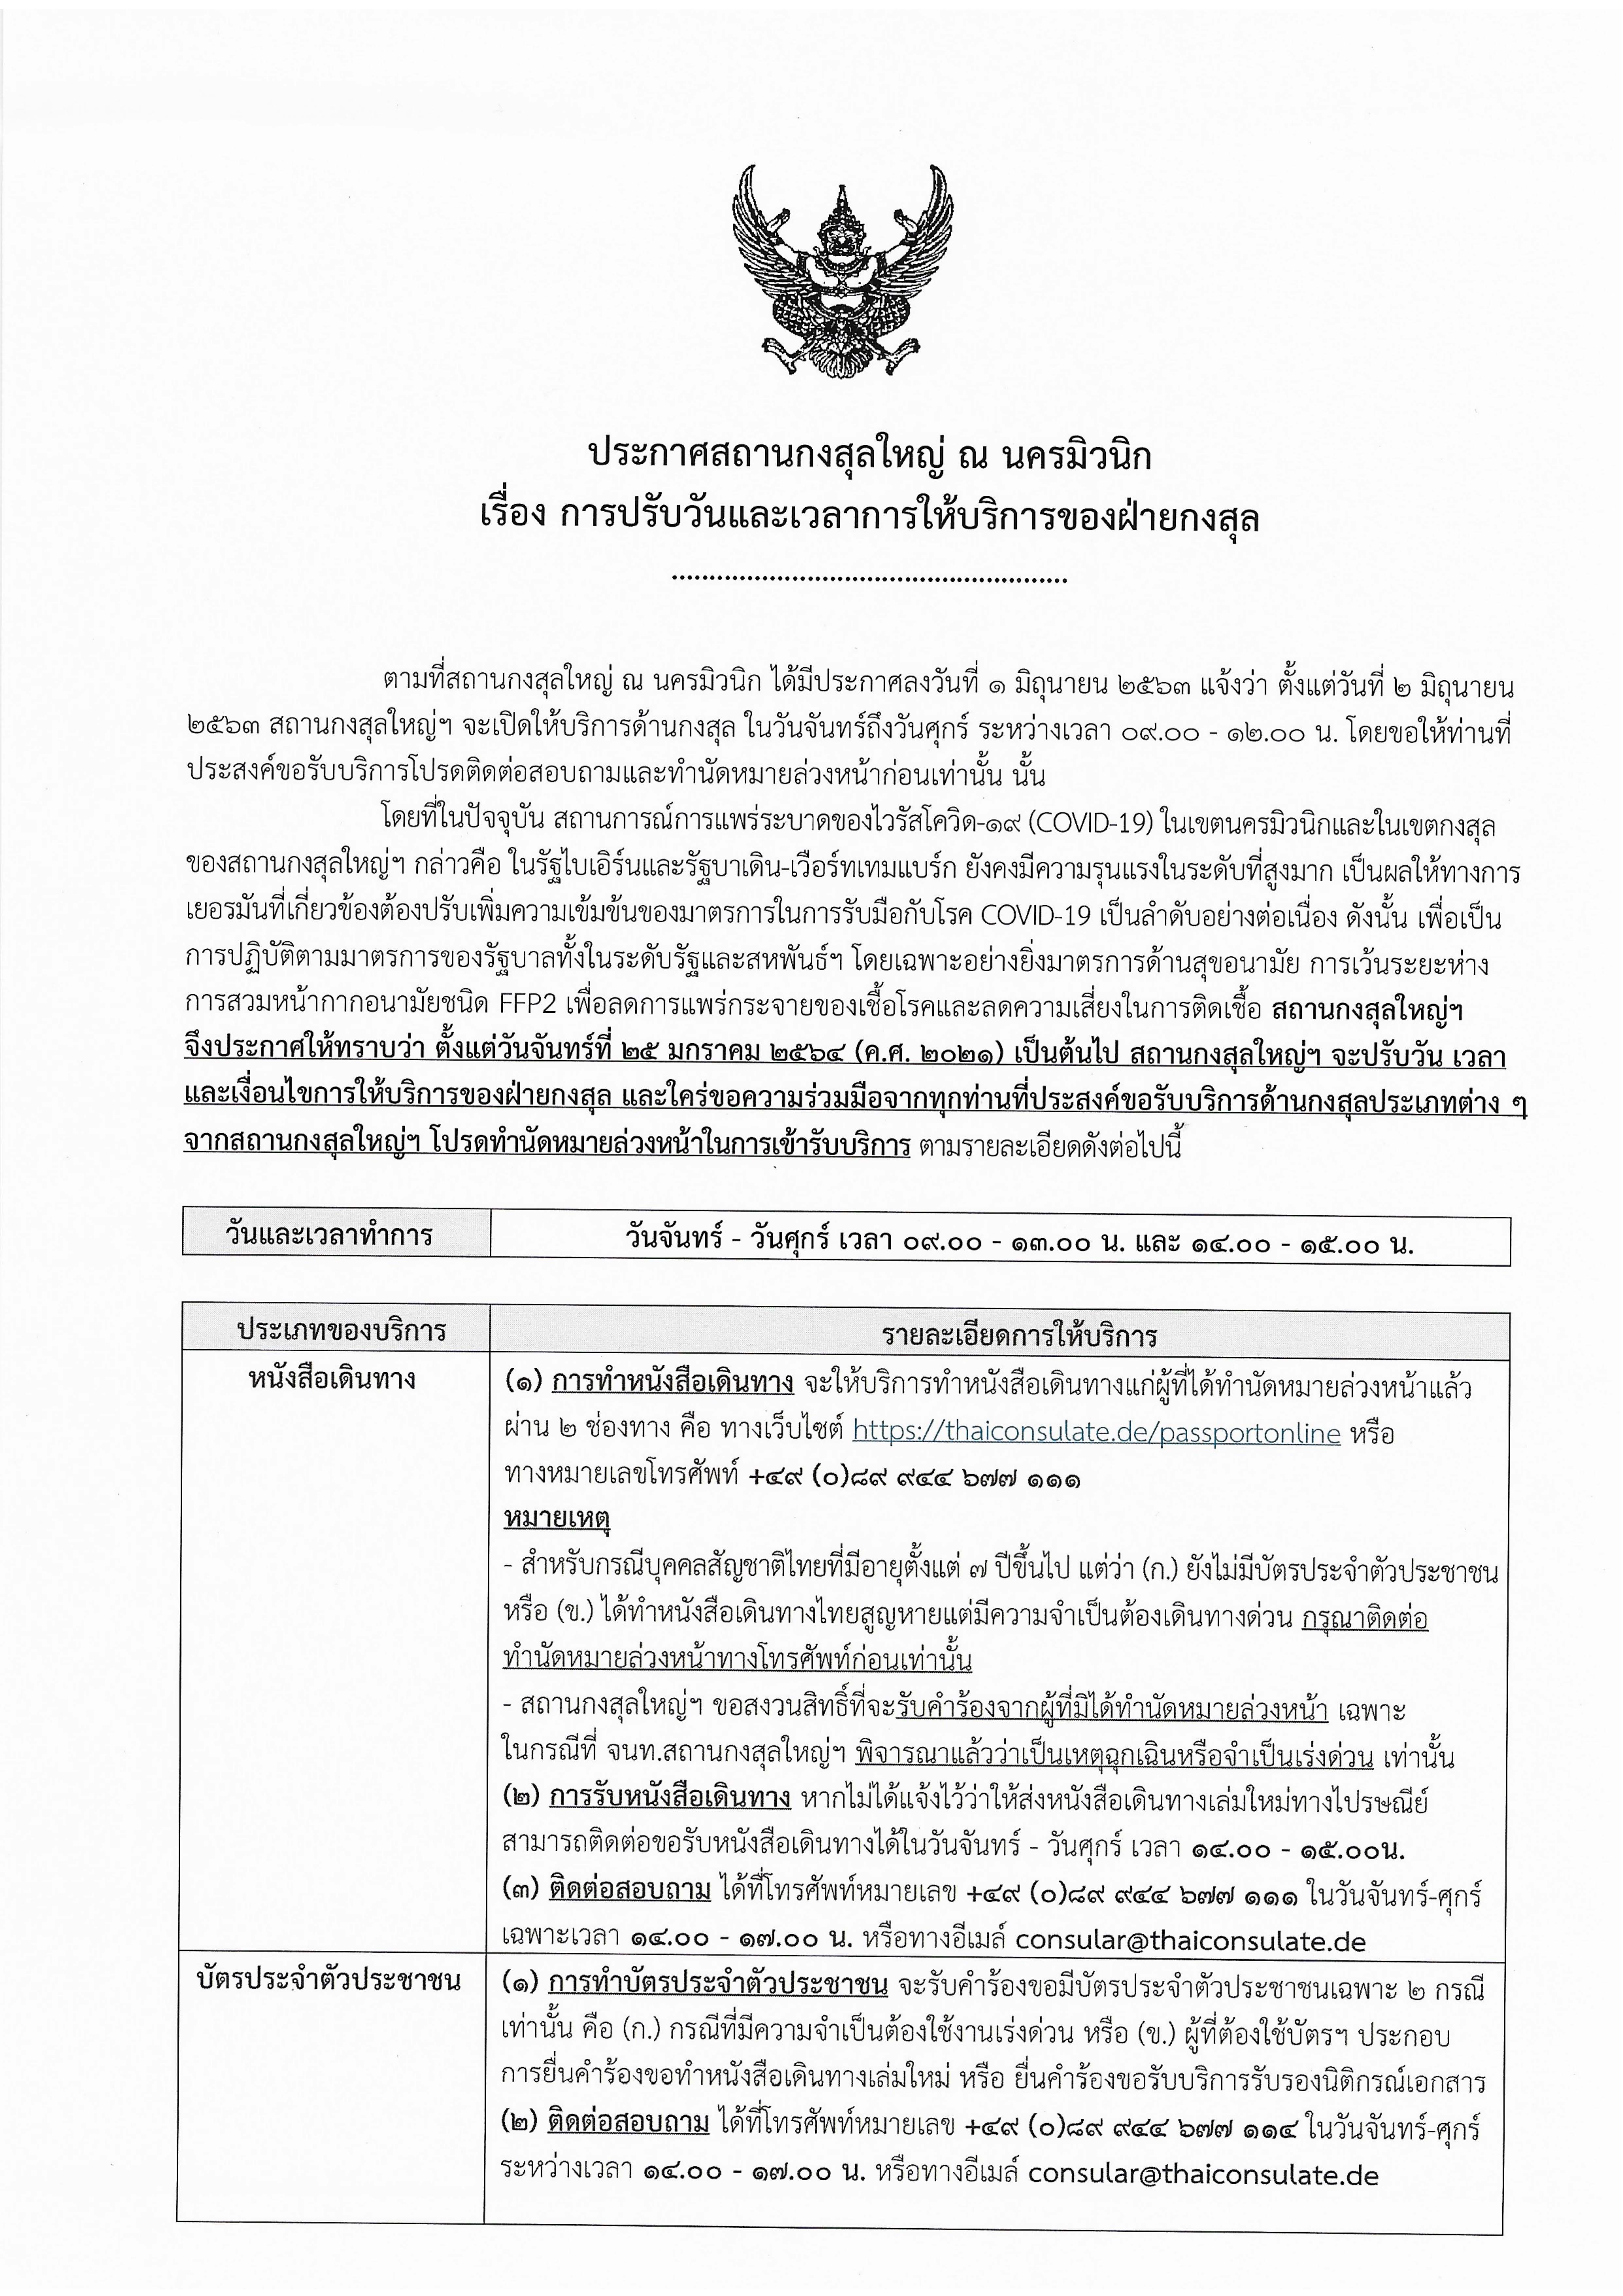 RTCG_-Anno-th-Consular-oper.-time-from-2021-01-25-onwards_Page_1